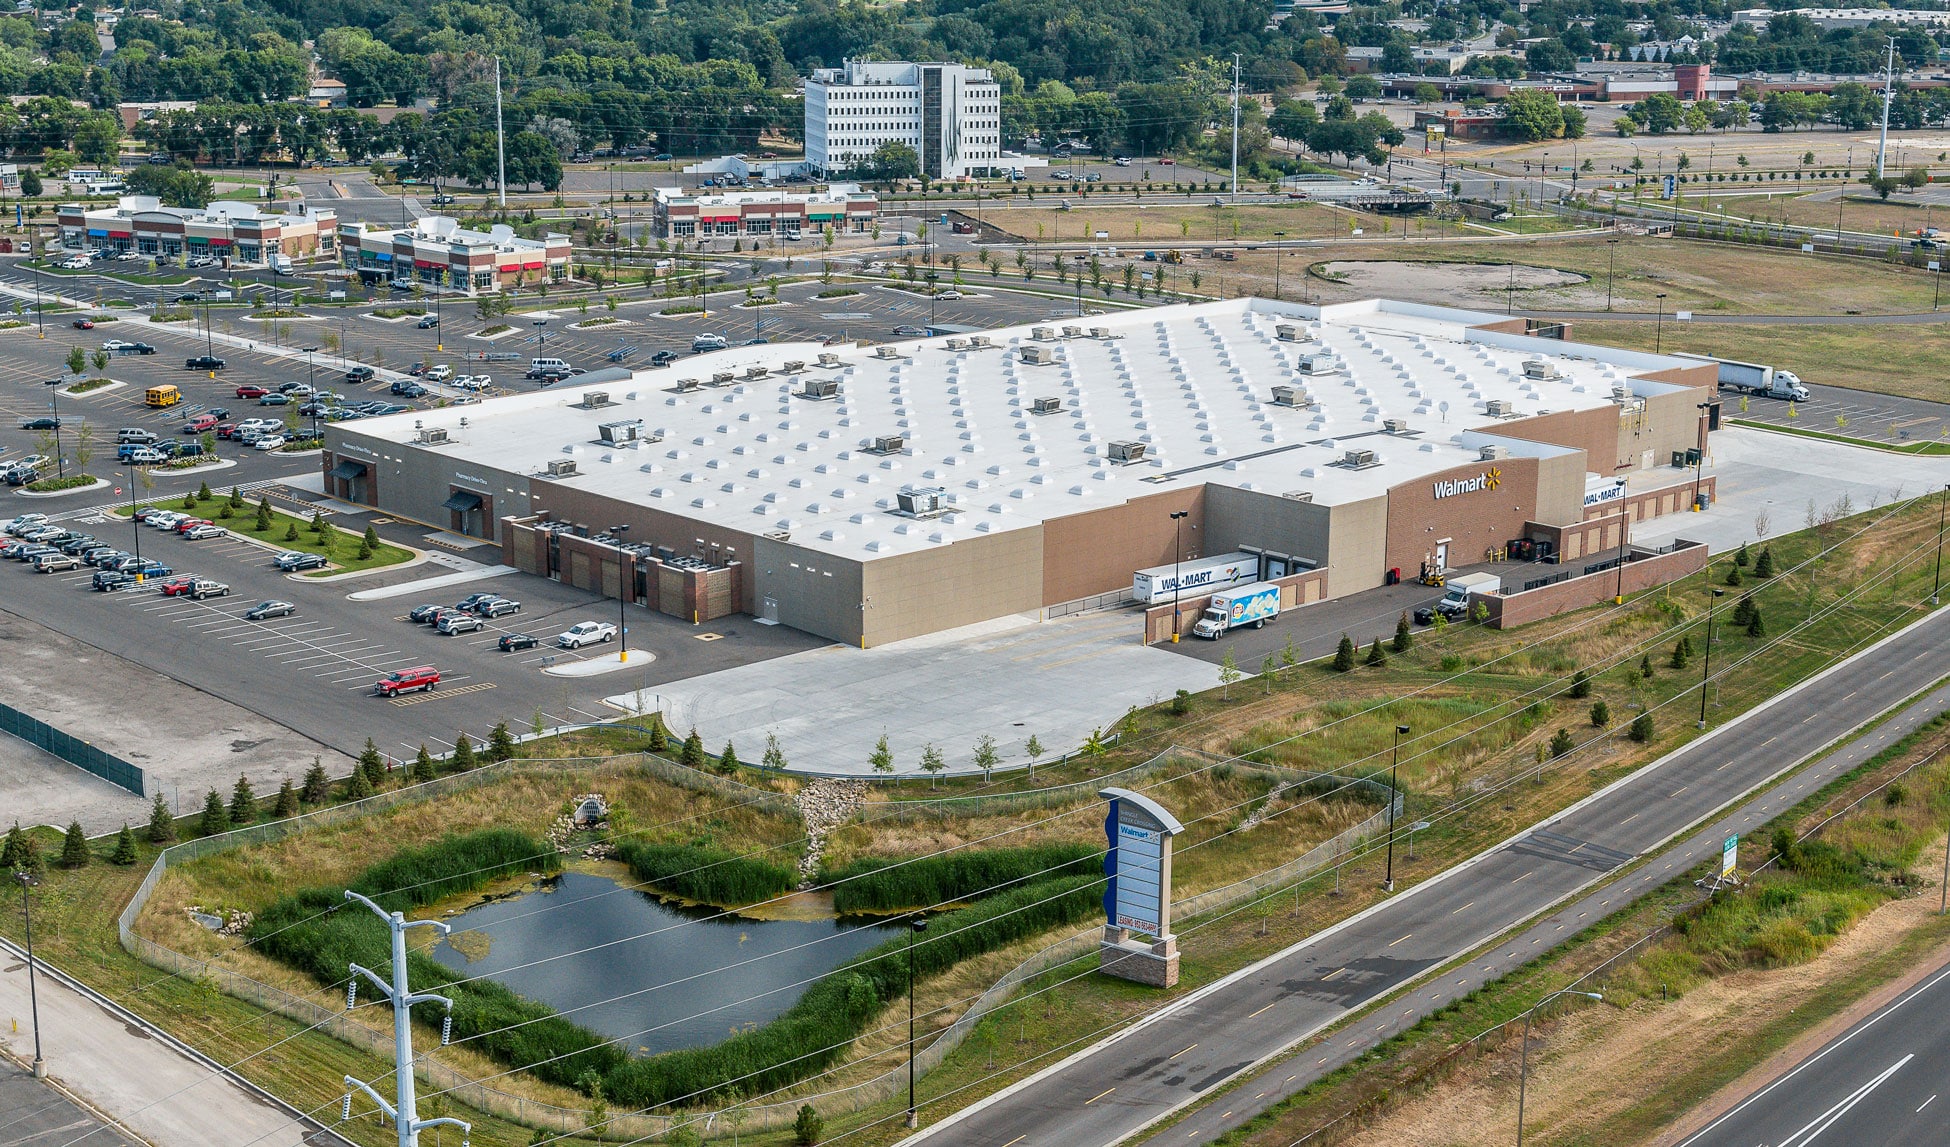 Kimley-Horn completed full civil design services for Walmart and Sam's Club sites in several locations across the United States.